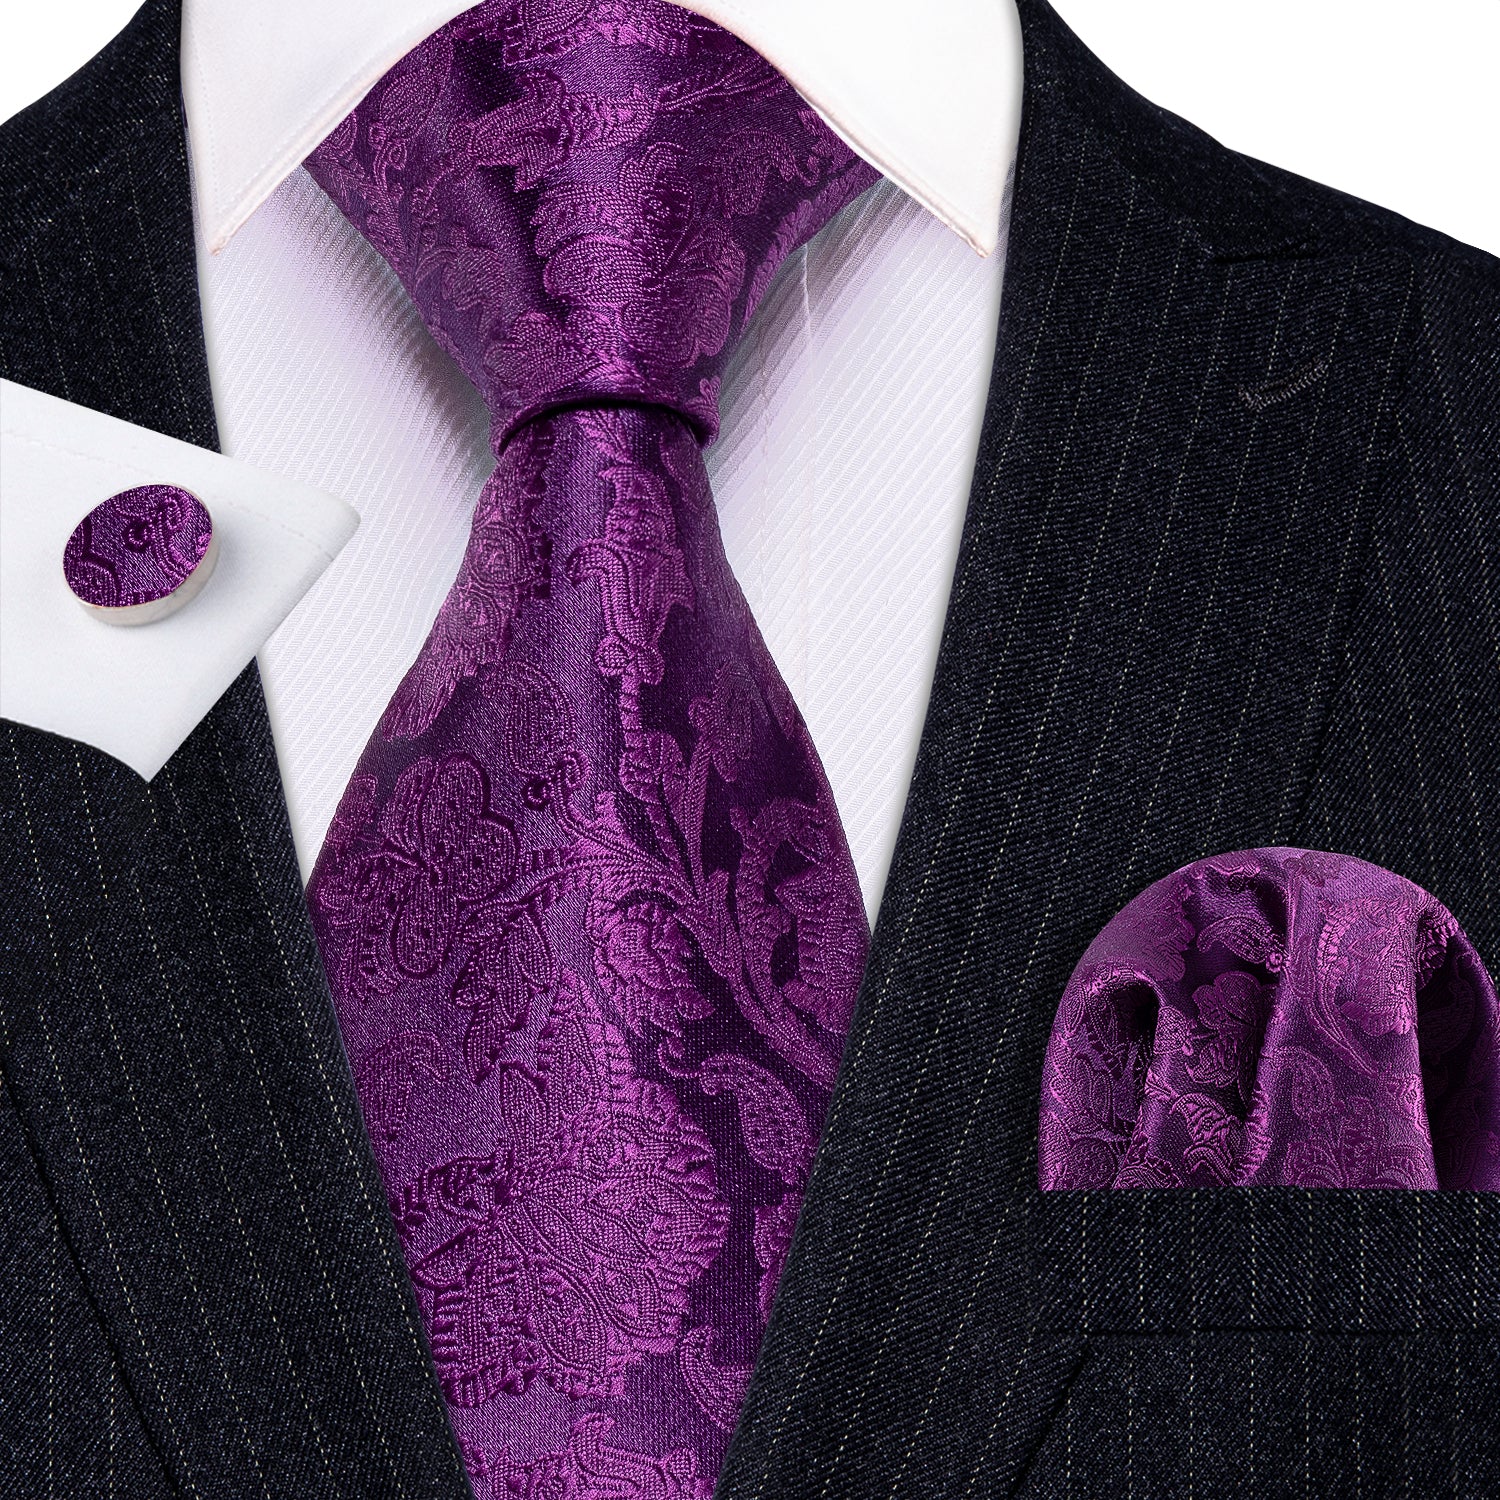 Barry.Wang Extra Long Tie Purple Floral Silk 63 Inches Tie Hanky Cufflinks Set